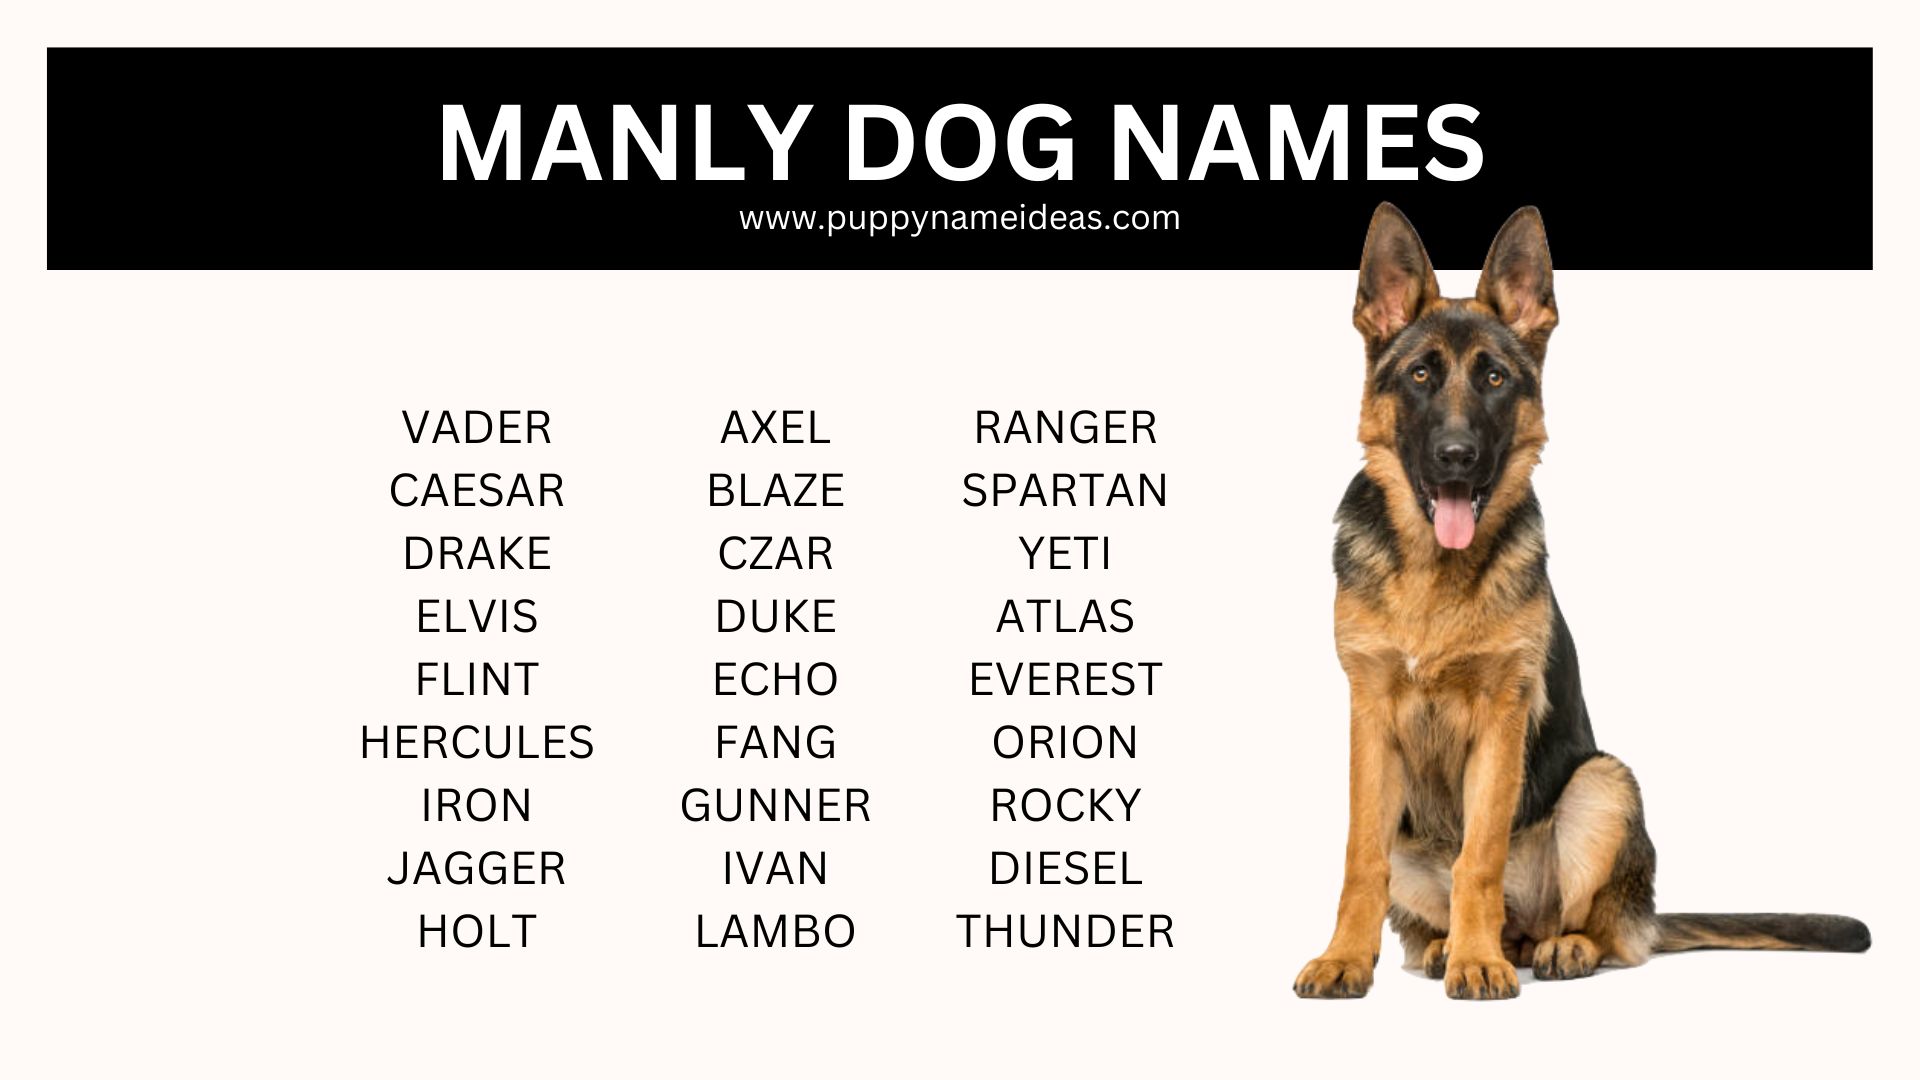 list of manly dog names